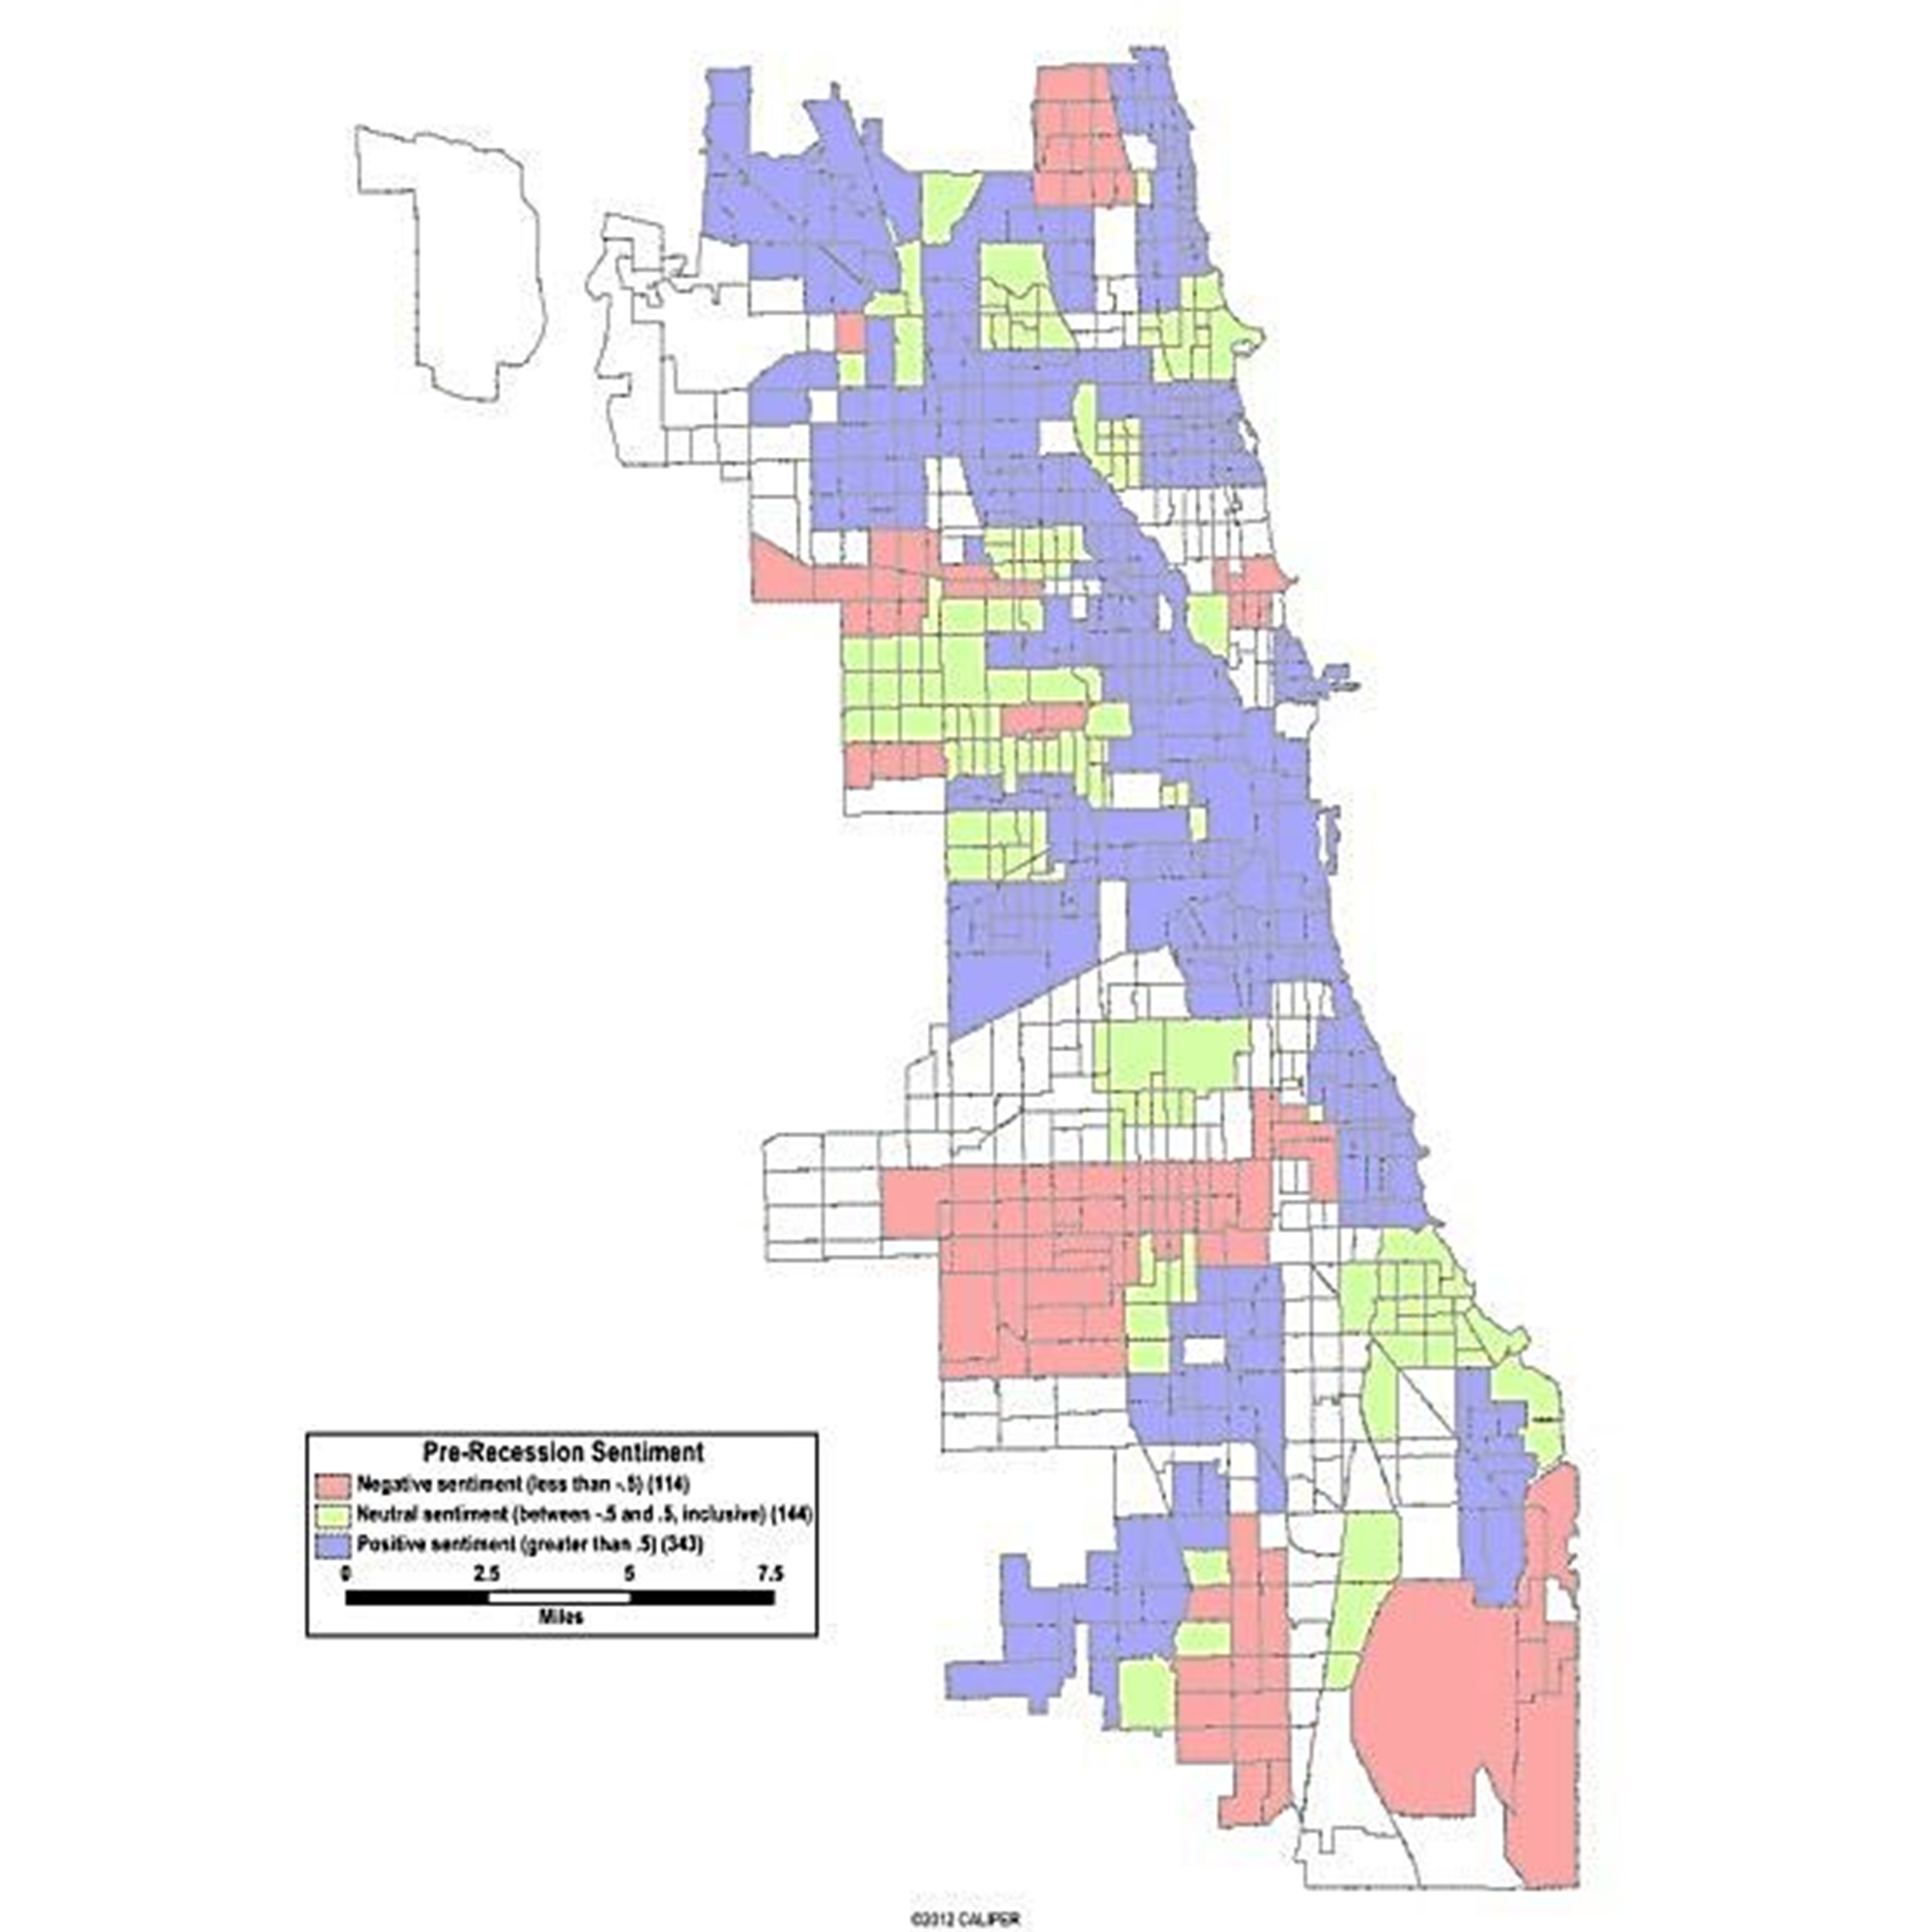 Map showing pre-recession sentiment of various Chicago neighborhoods. Most neighborhoods report positive sentiment, although there are pockets of negative sentiment, particularly in the south. 